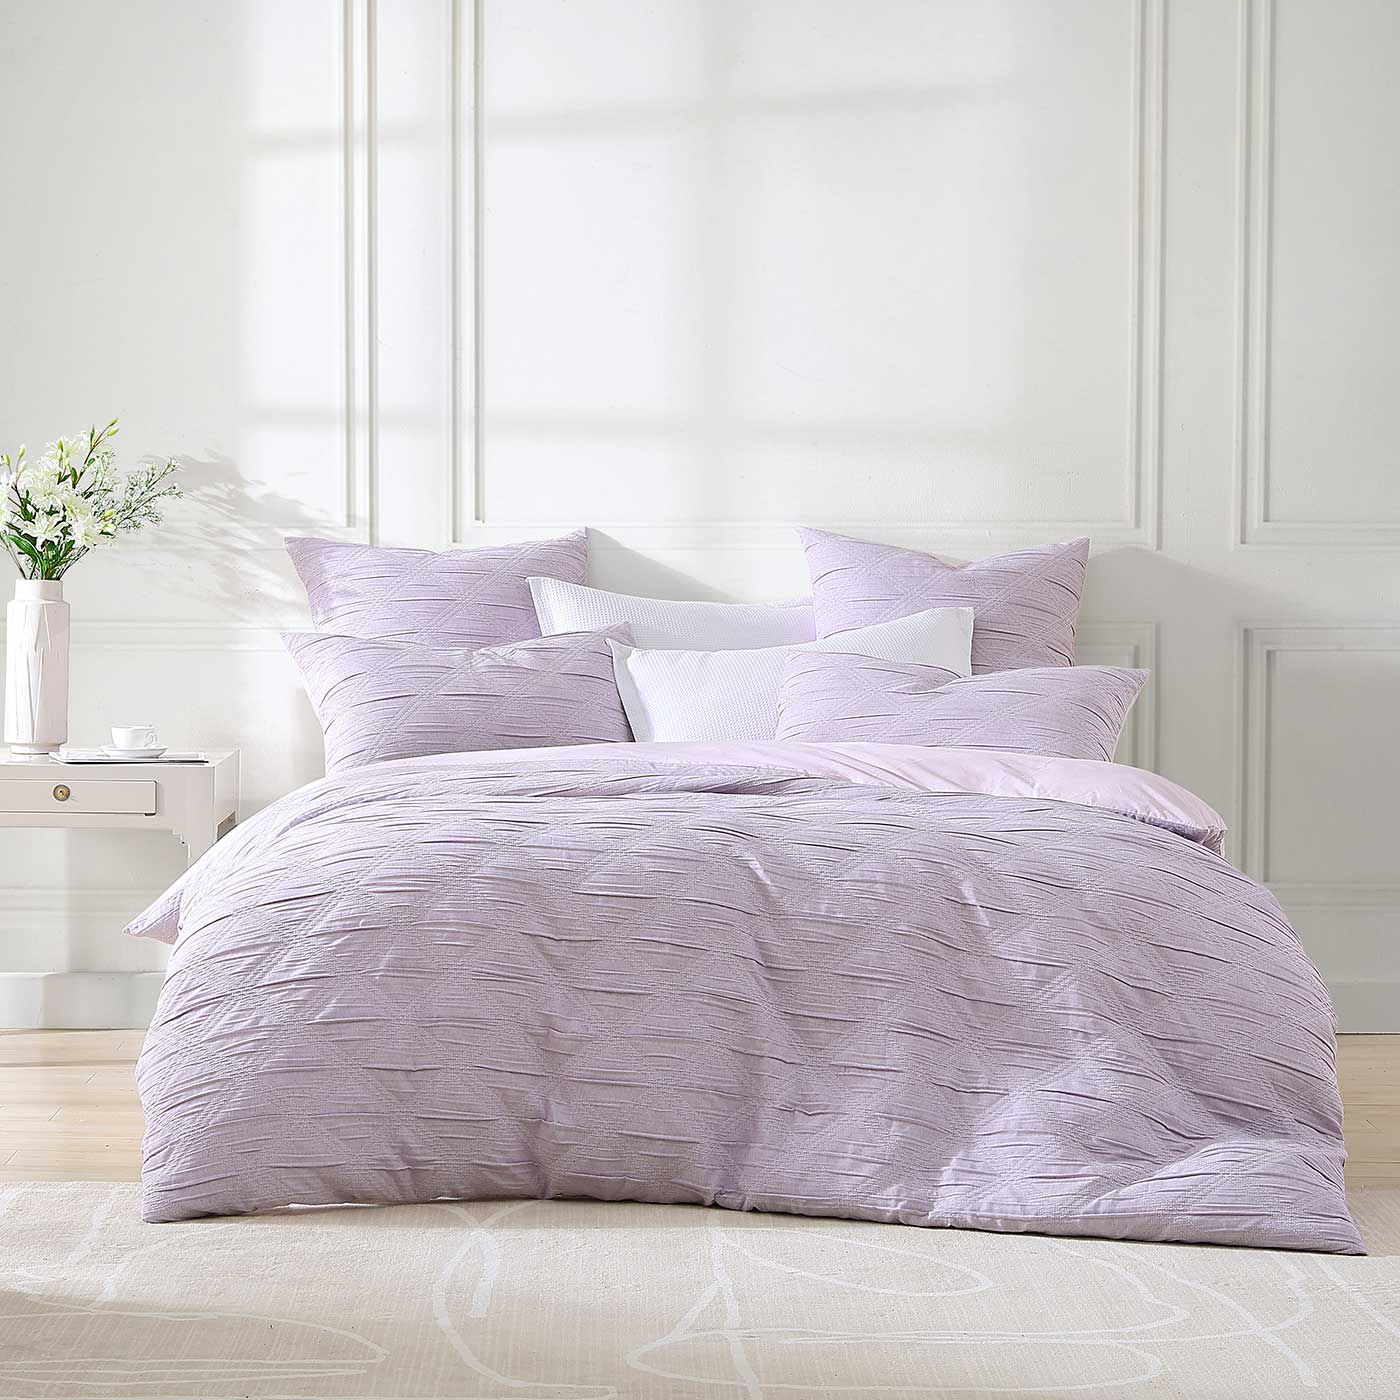 Create a bold statement in your bedroom with the Reine Lilac Quilt Cover Set. This luxurious set features an eye-catching monochrome diamond design